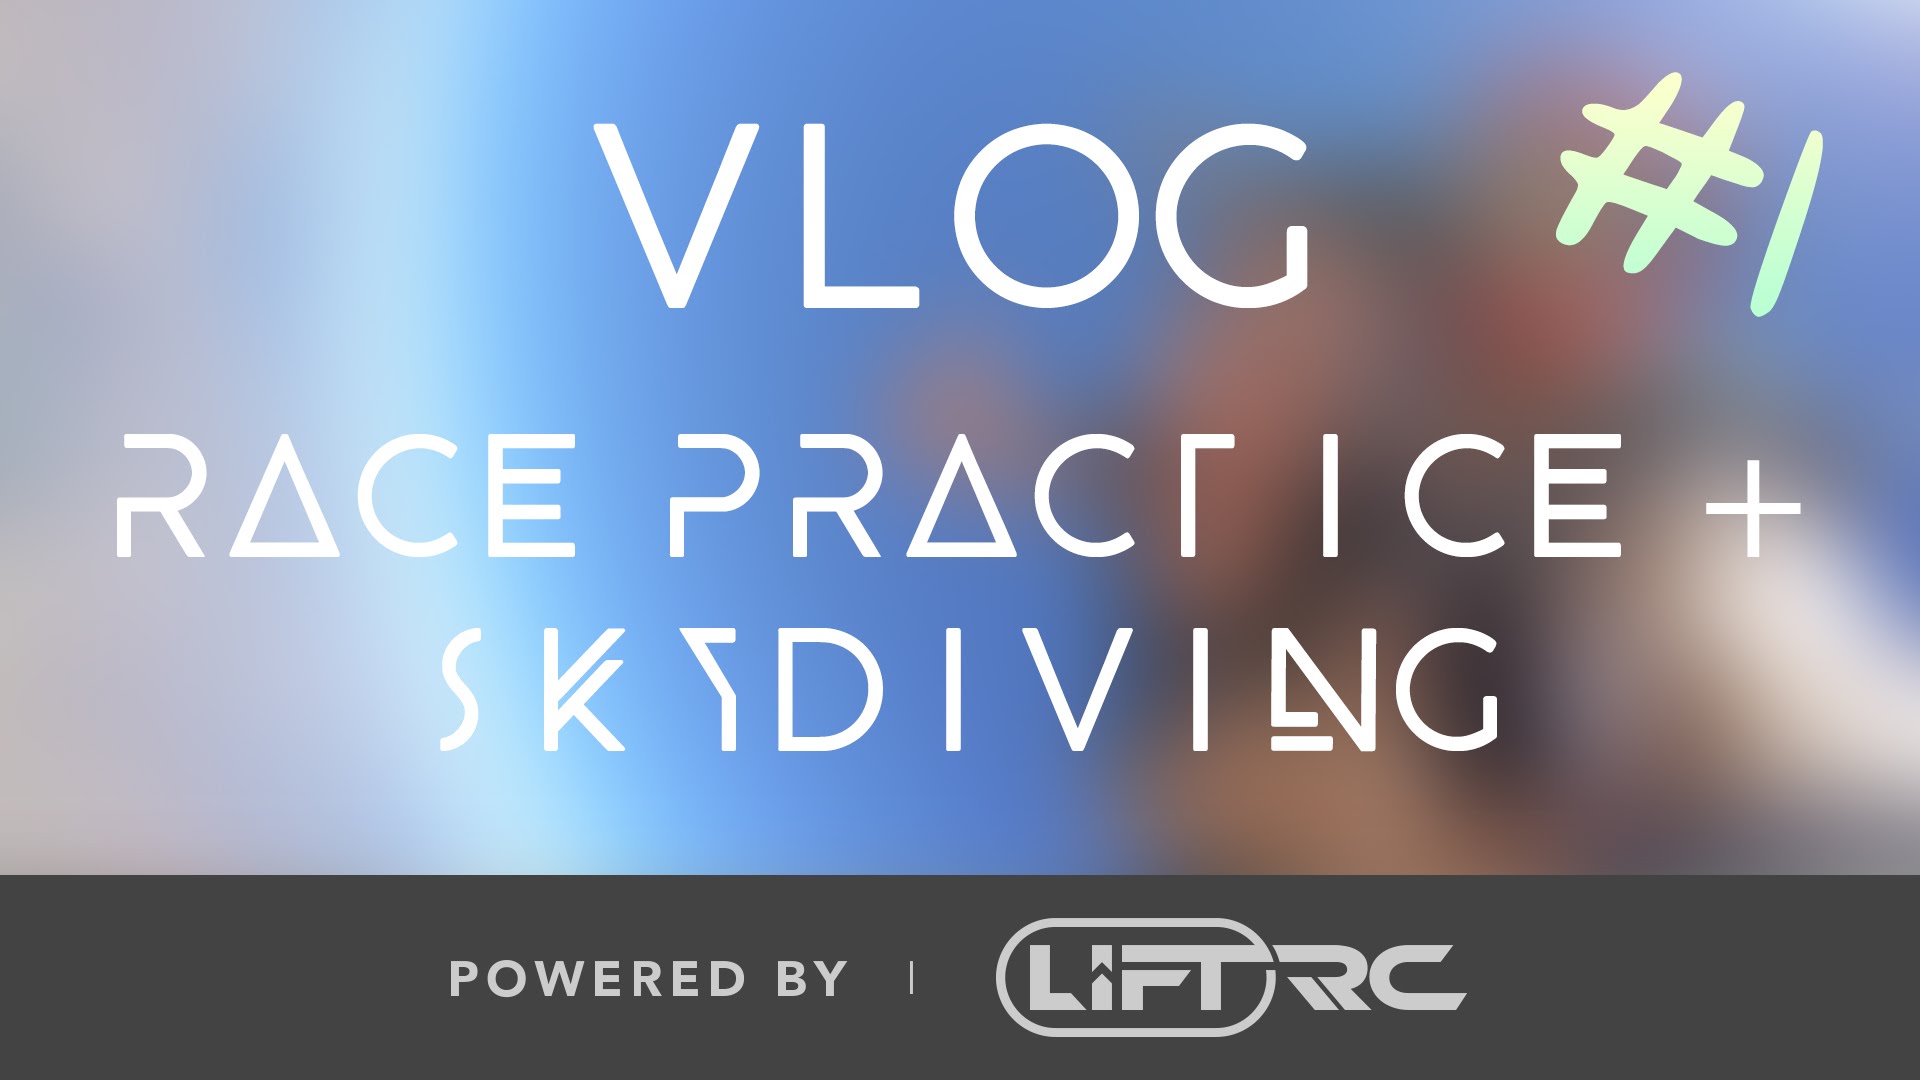 Vlog 001 – “FPV RACE PRACTICE + SKYDIVING” – LRC FREESTYLE QUAD